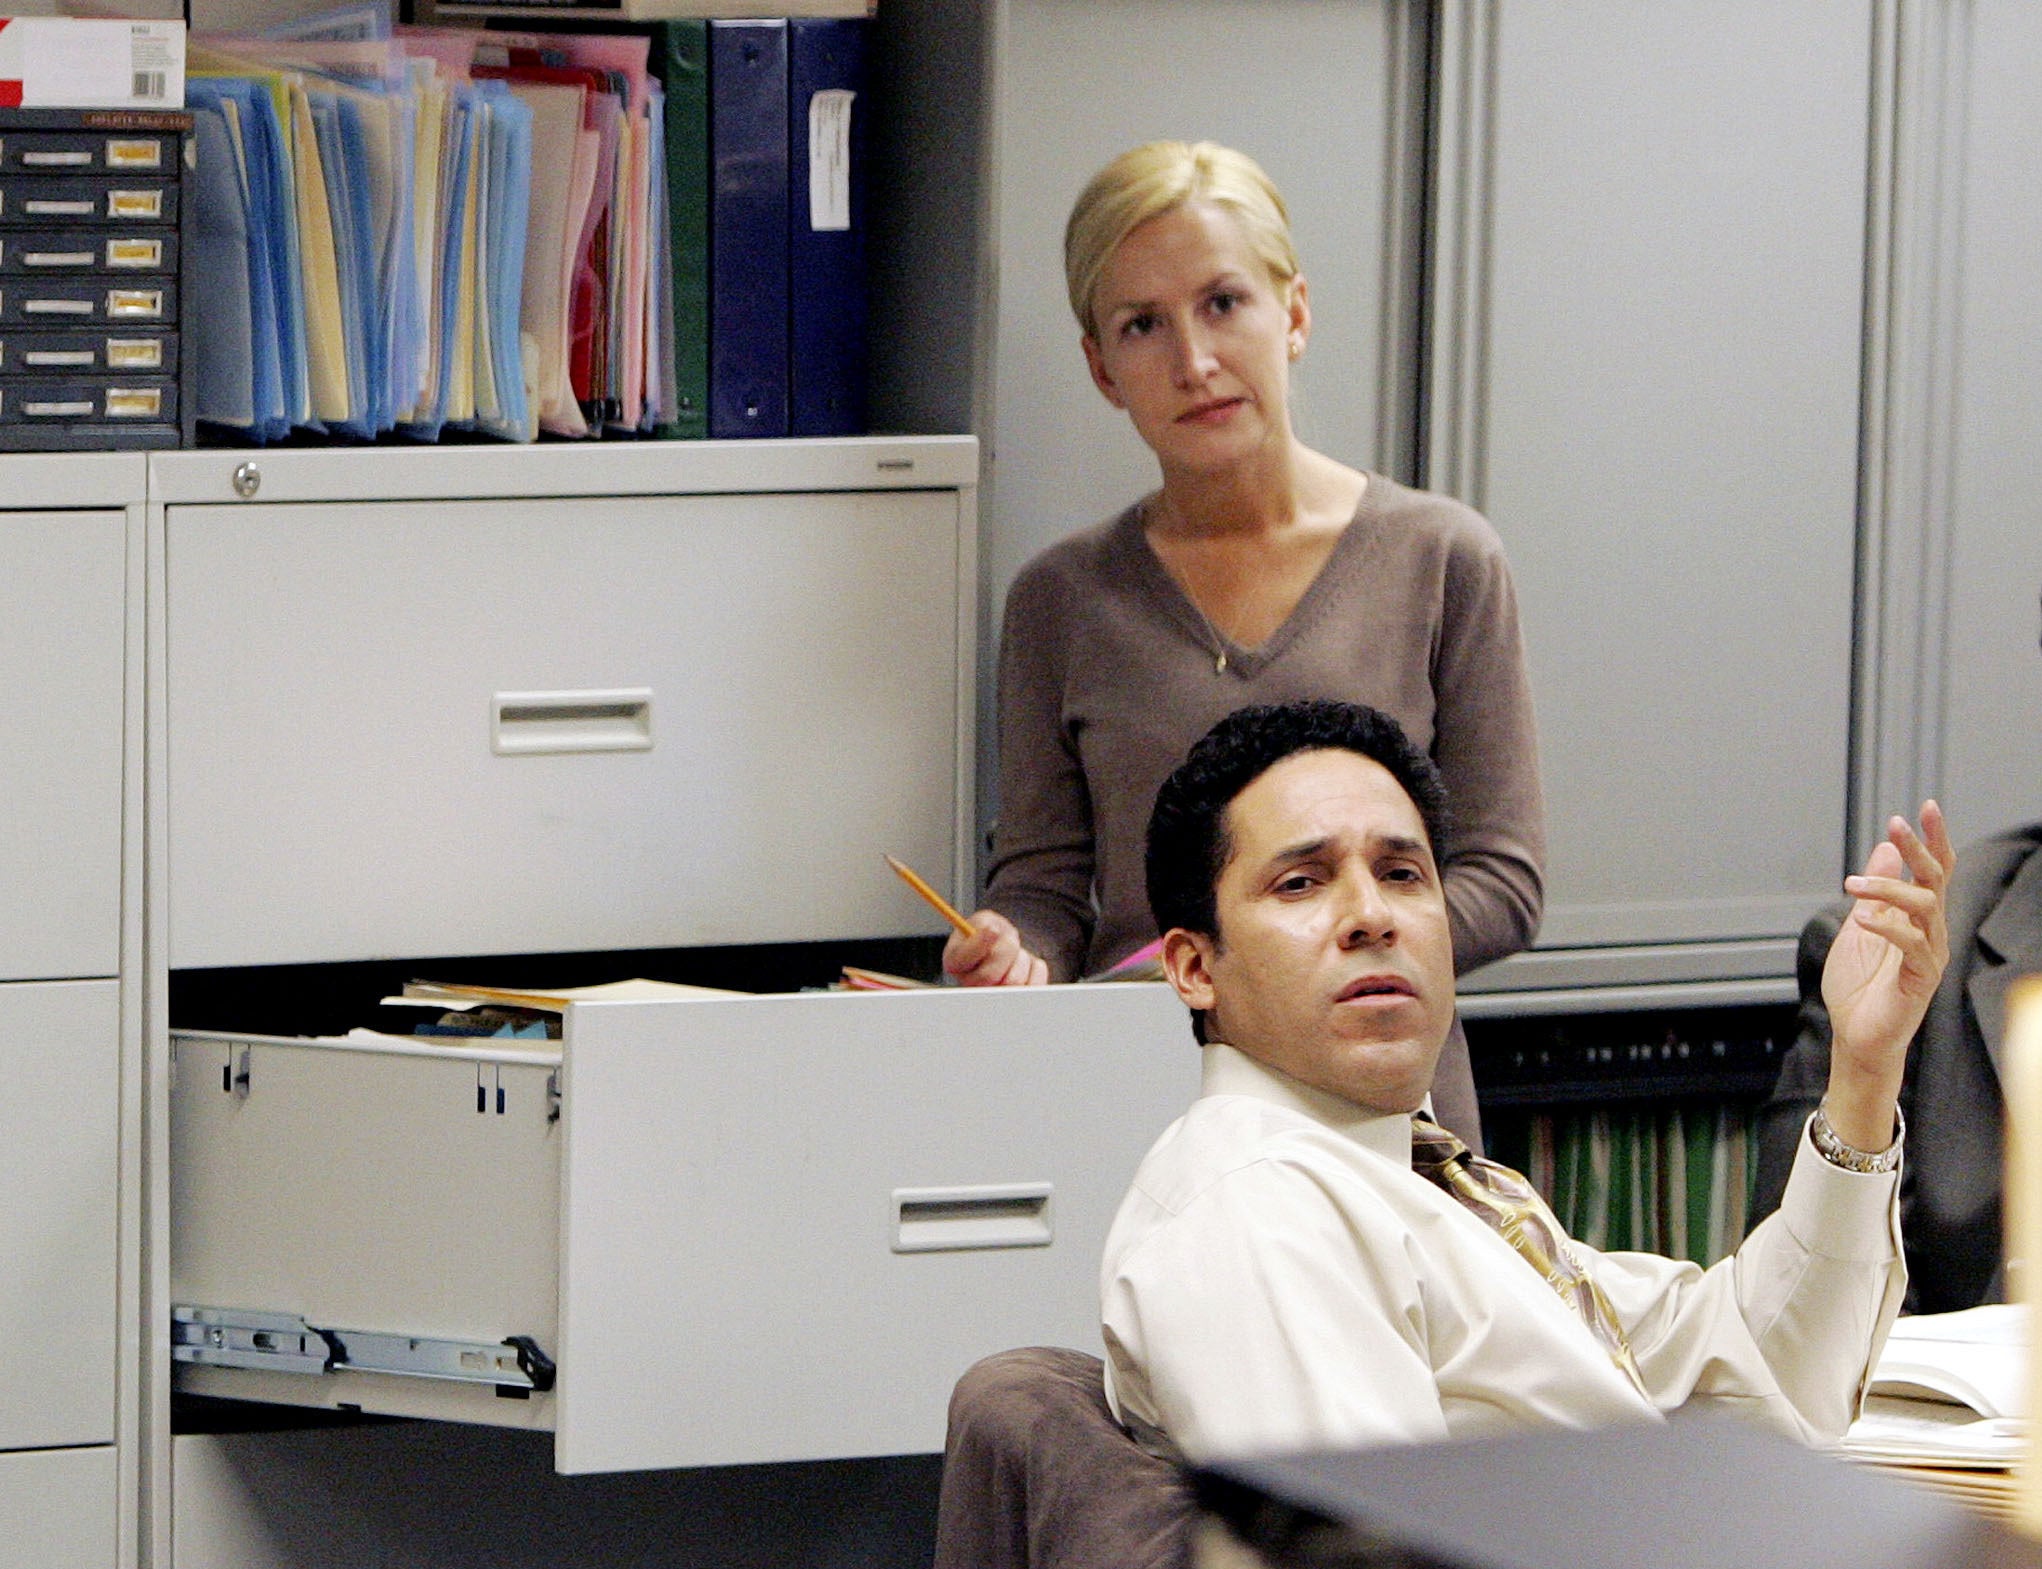 A woman stands at a filing cabinet. A man sits as a desk, he looks confused.